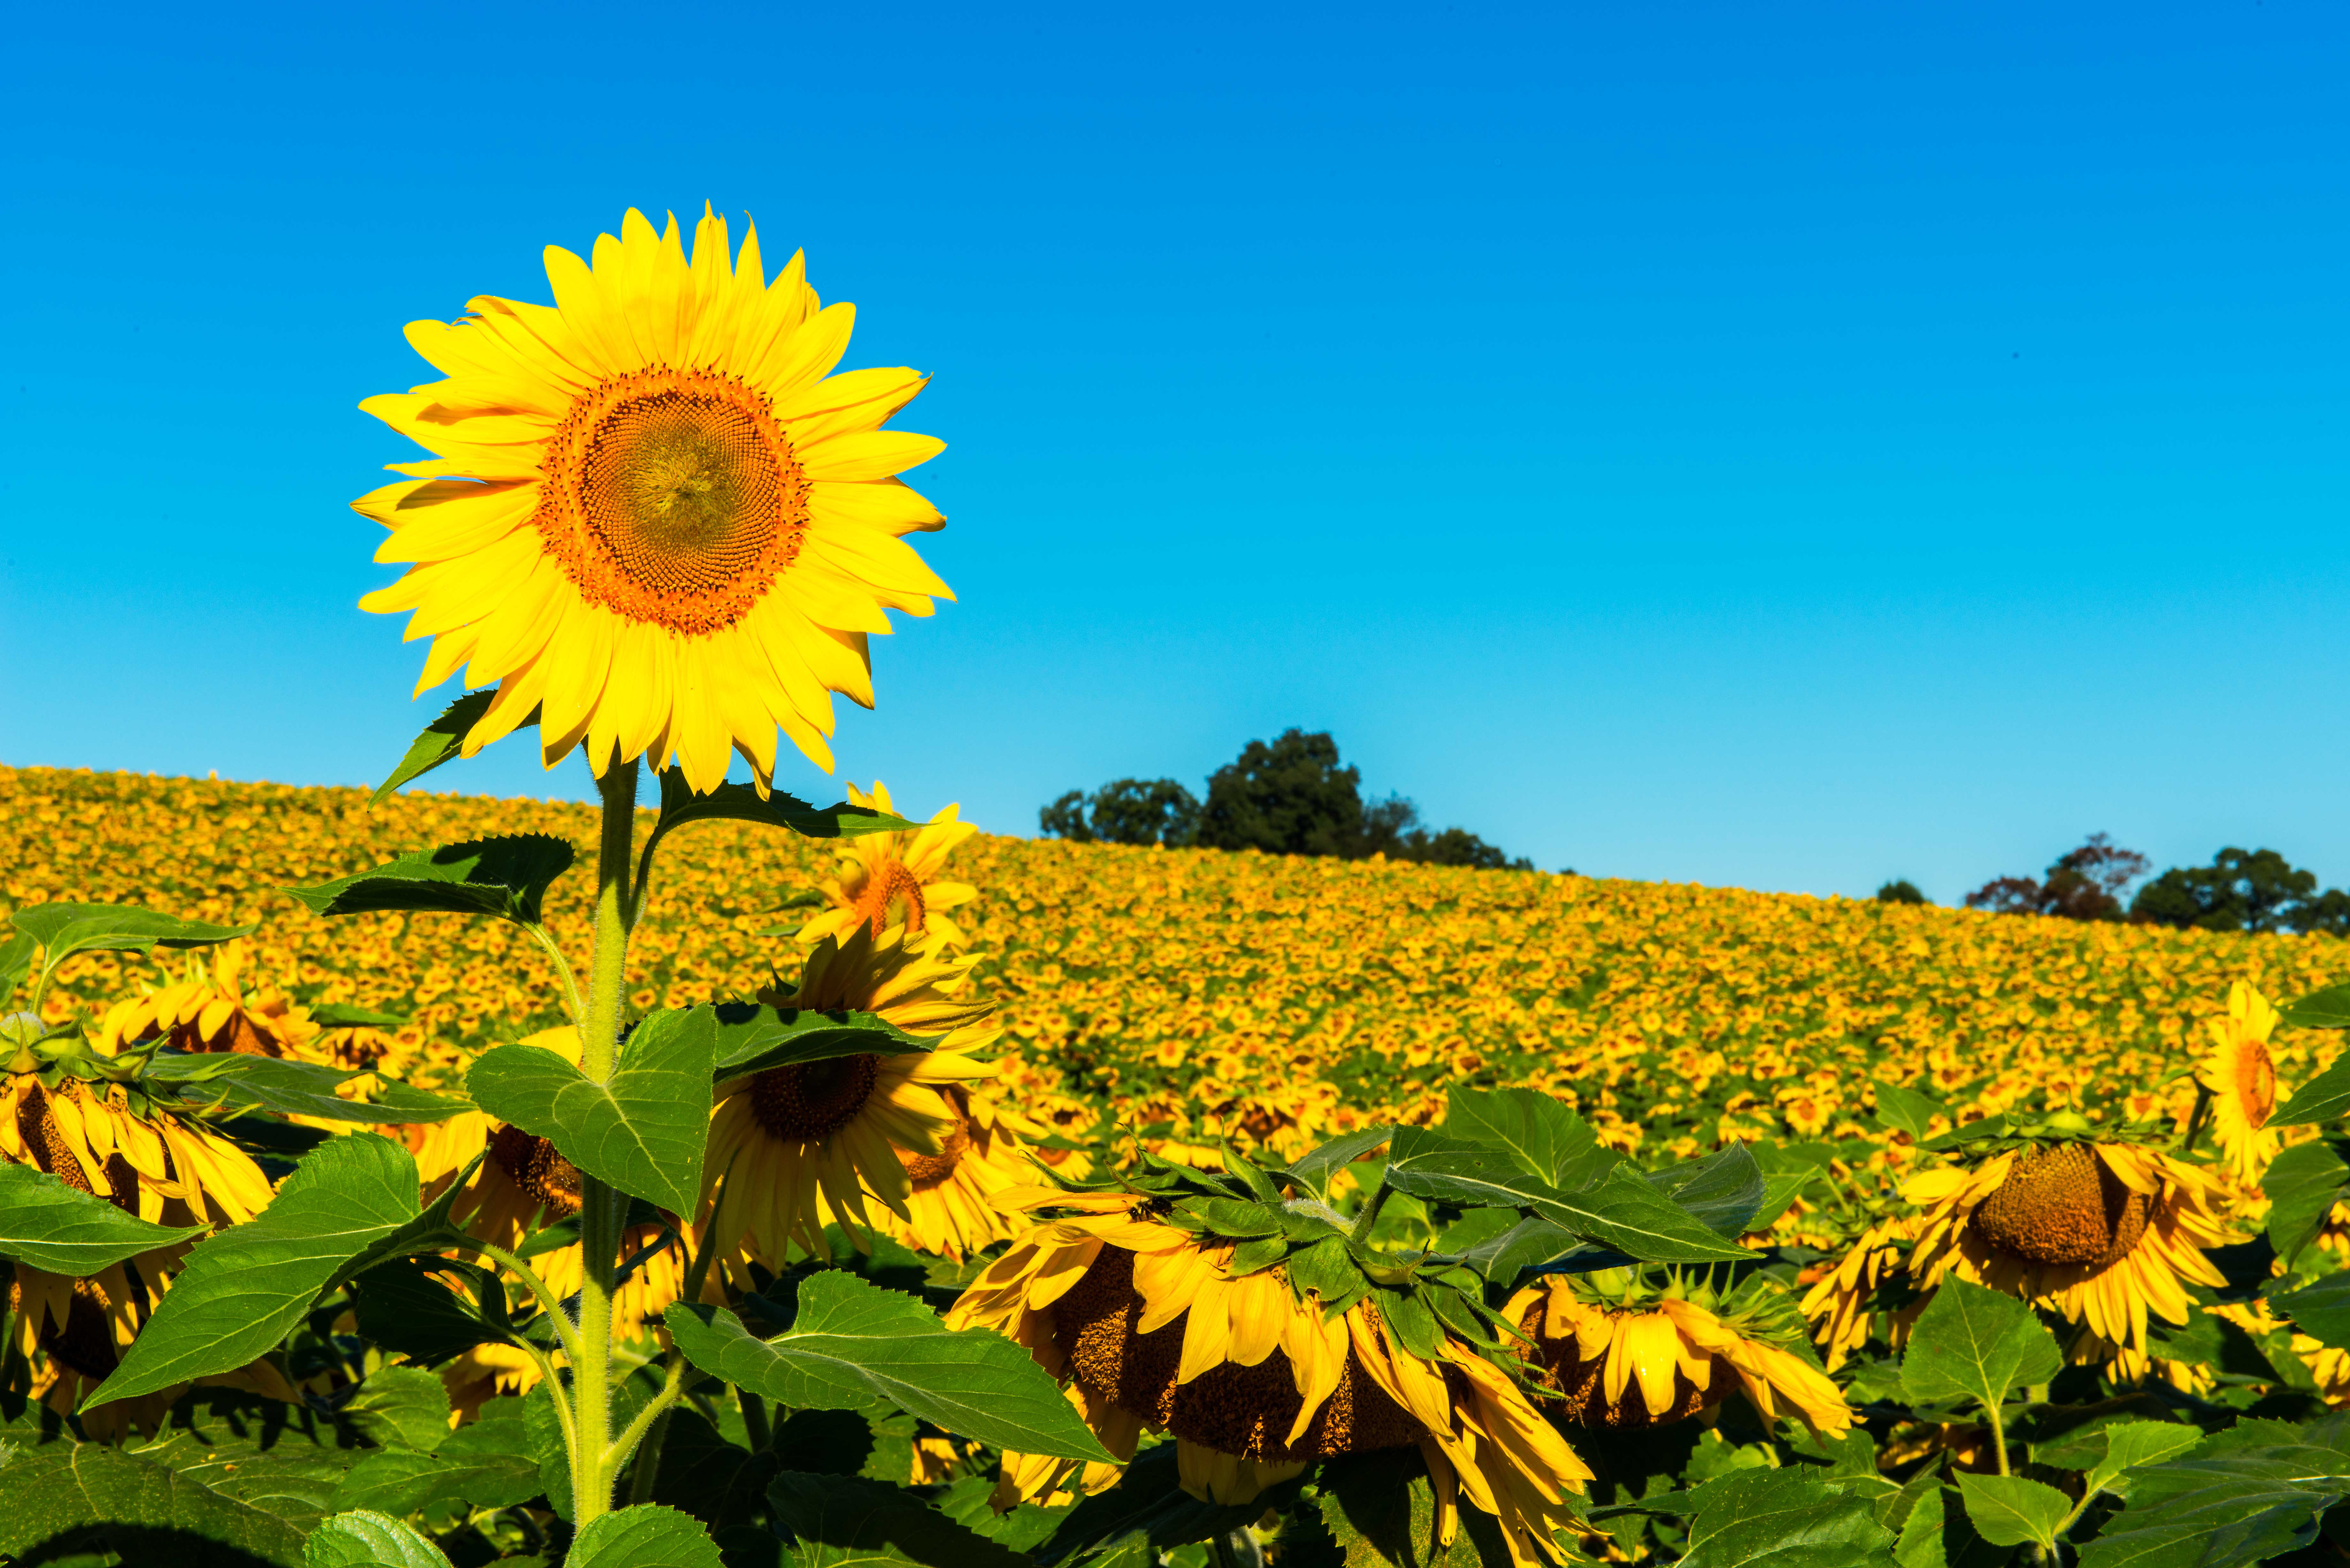 Download Helianthus Sunflowers Wallpaper Gallery Images ...